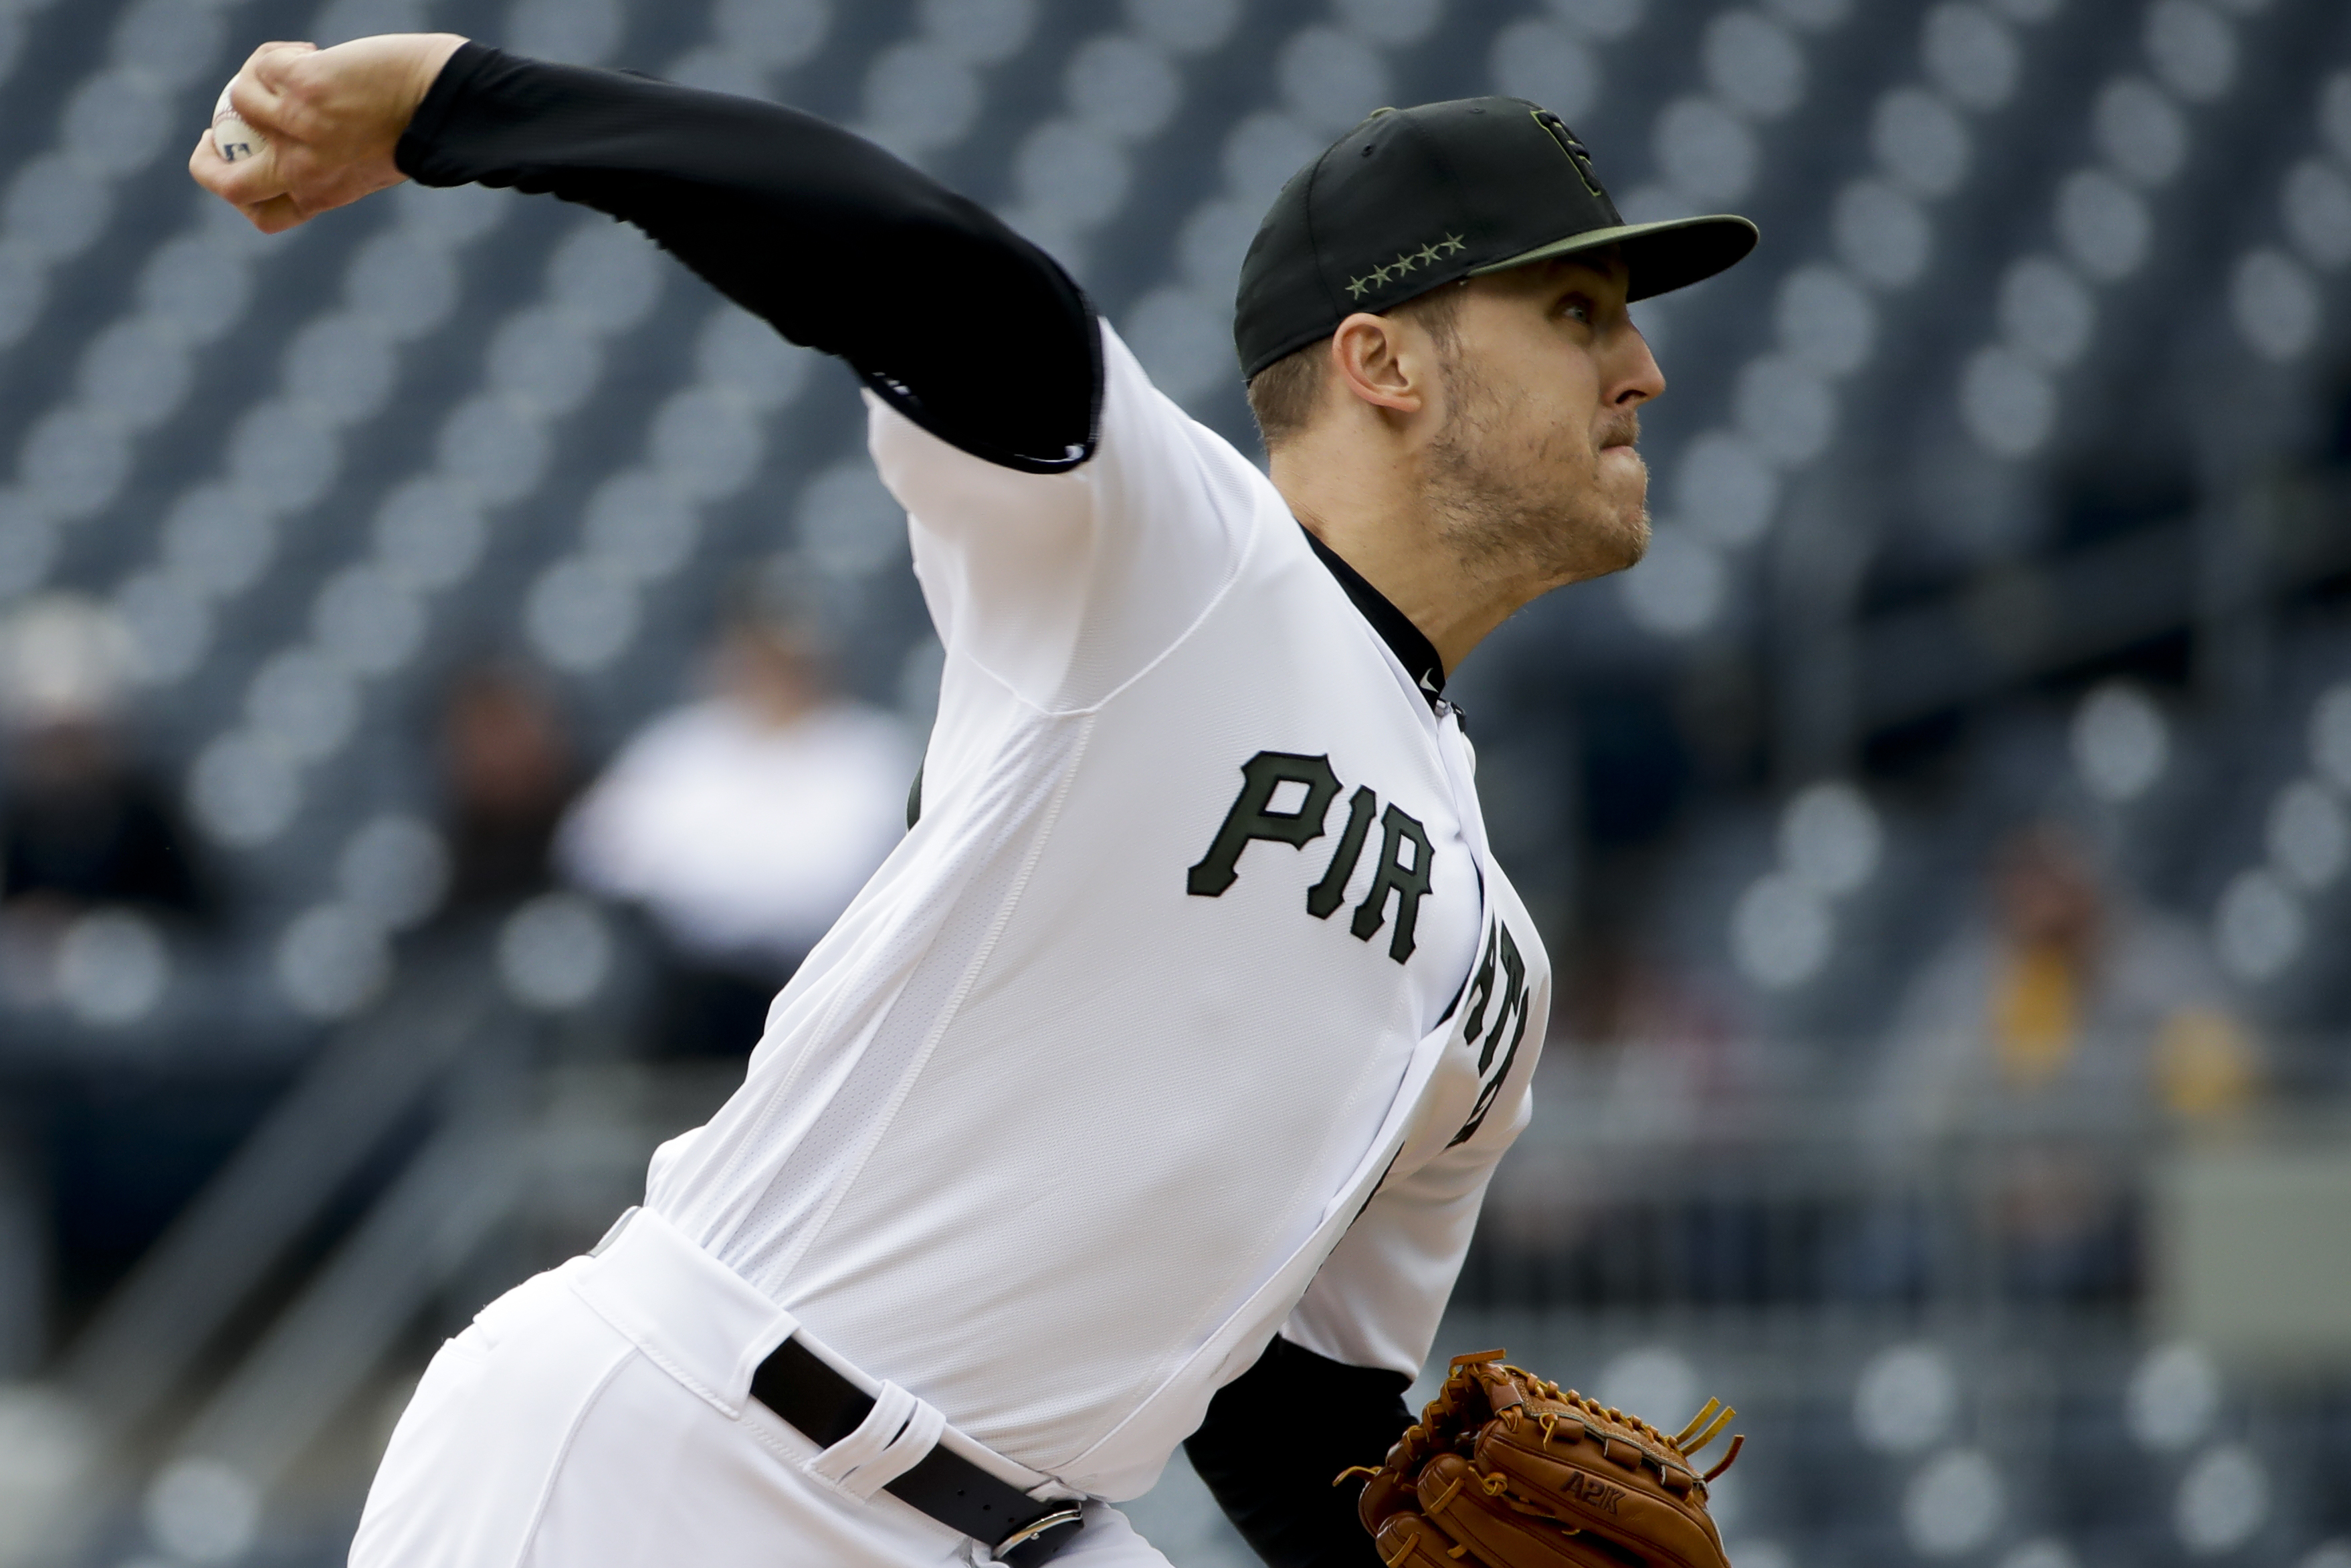 Yankees' Jameson Taillon could be 'stud pitcher,' MLB insider says